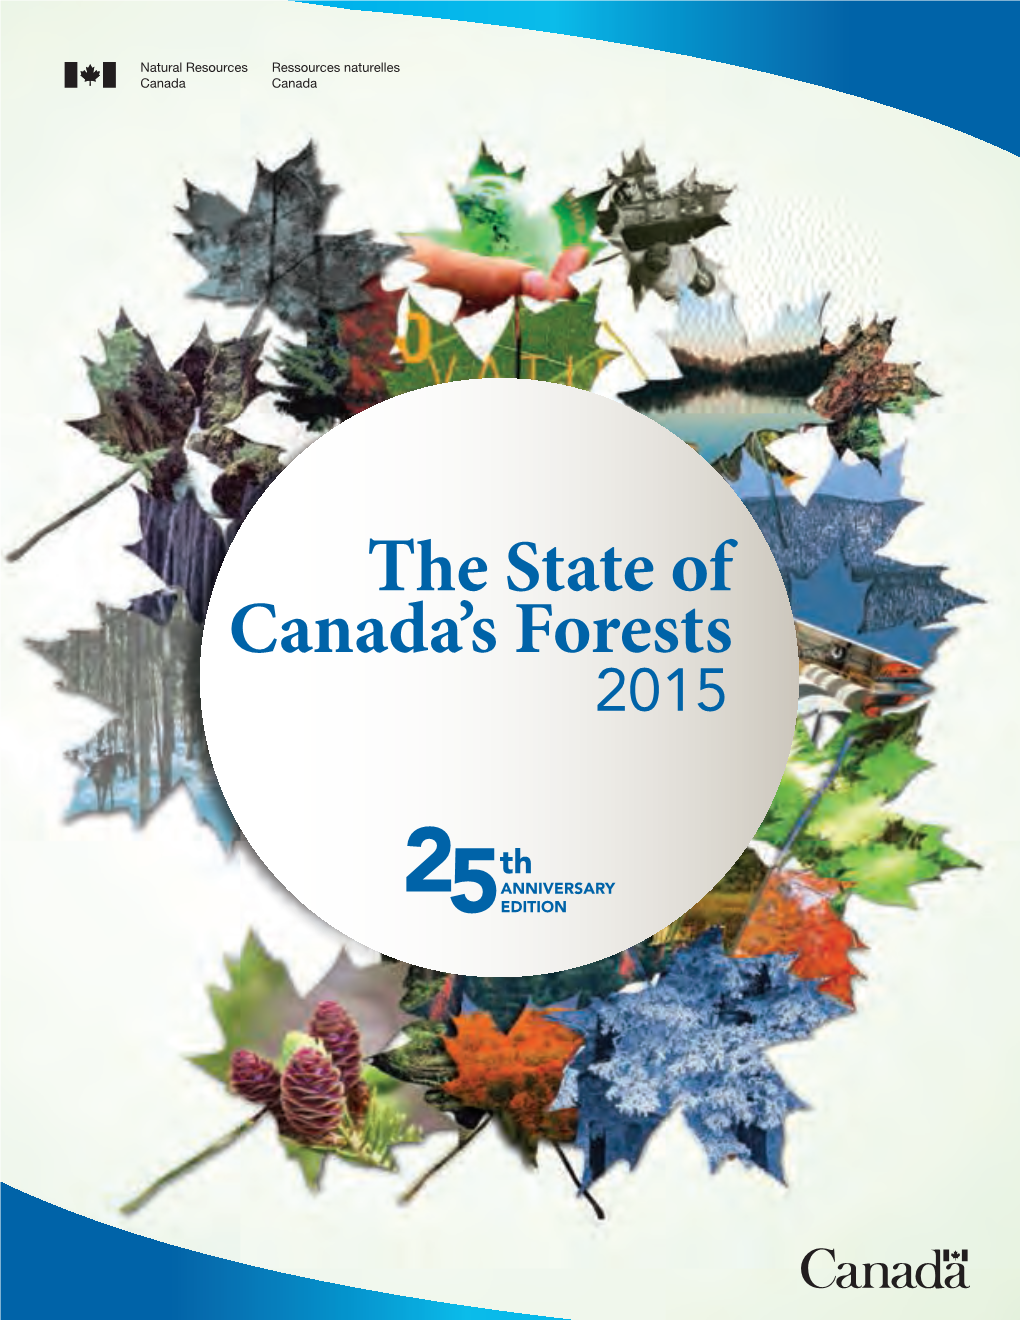 The State of Canada's Forests. Annual Report 2015